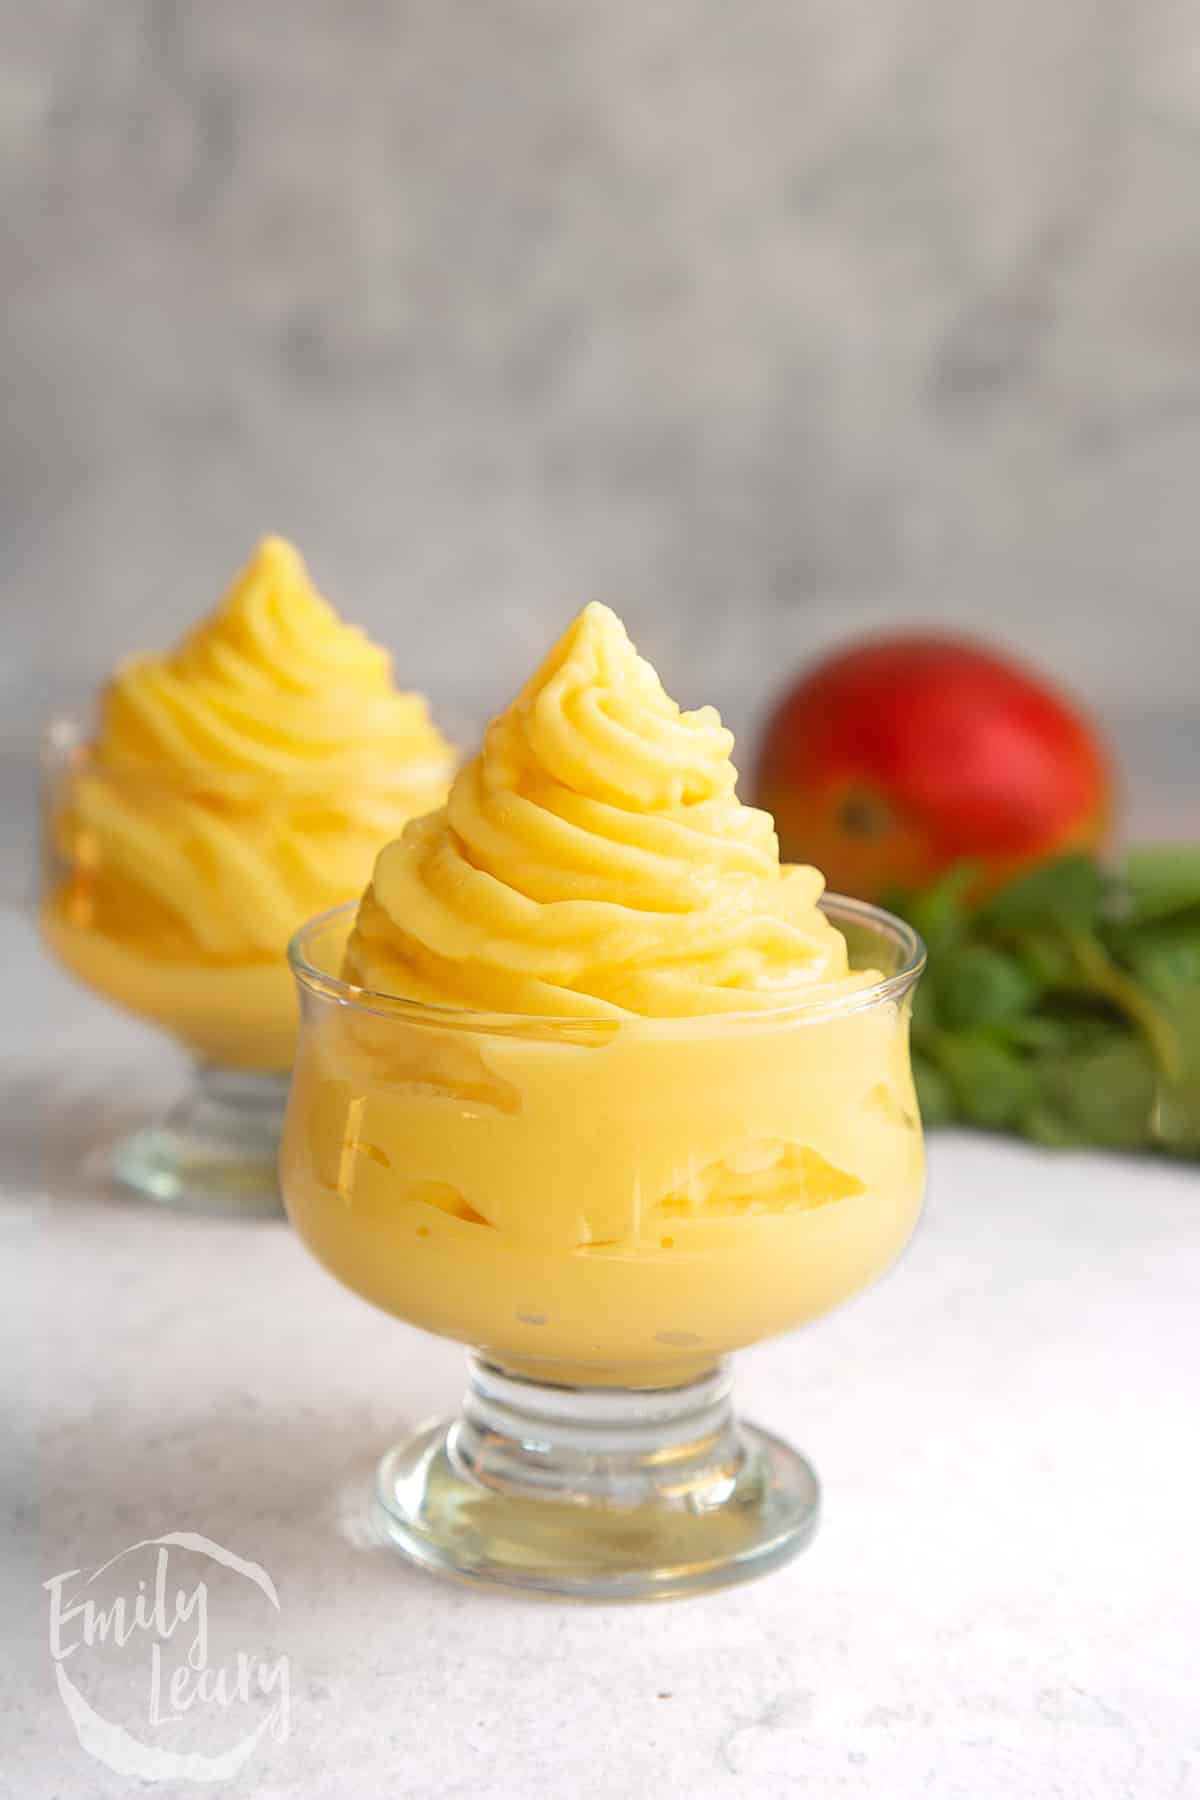 a decadent glass filled with mango ice cream.